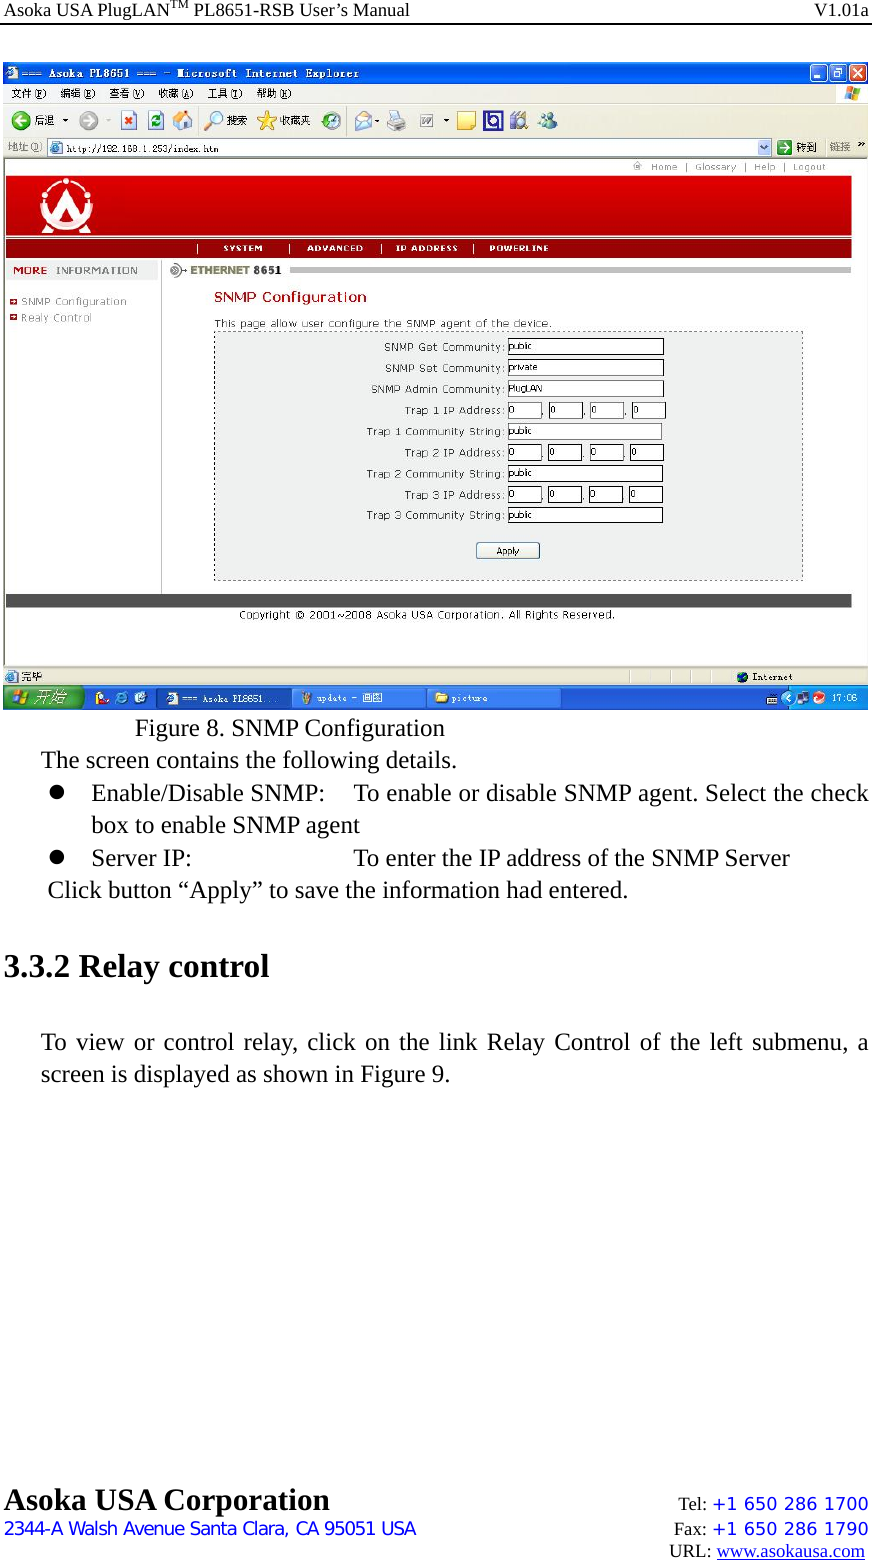 Asoka USA PlugLANTM PL8651-RSB User’s Manual    V1.01a     Figure 8. SNMP Configuration The screen contains the following details. z Enable/Disable SNMP:  To enable or disable SNMP agent. Select the check box to enable SNMP agent   z Server IP:        To enter the IP address of the SNMP Server Click button “Apply” to save the information had entered. 3.3.2 Relay control To view or control relay, click on the link Relay Control of the left submenu, a screen is displayed as shown in Figure 9. Asoka USA Corporation    Tel: +1 650 286 1700    2344-A Walsh Avenue Santa Clara, CA 95051 USA   Fax: +1 650 286 1790                                                                                     URL: www.asokausa.com 